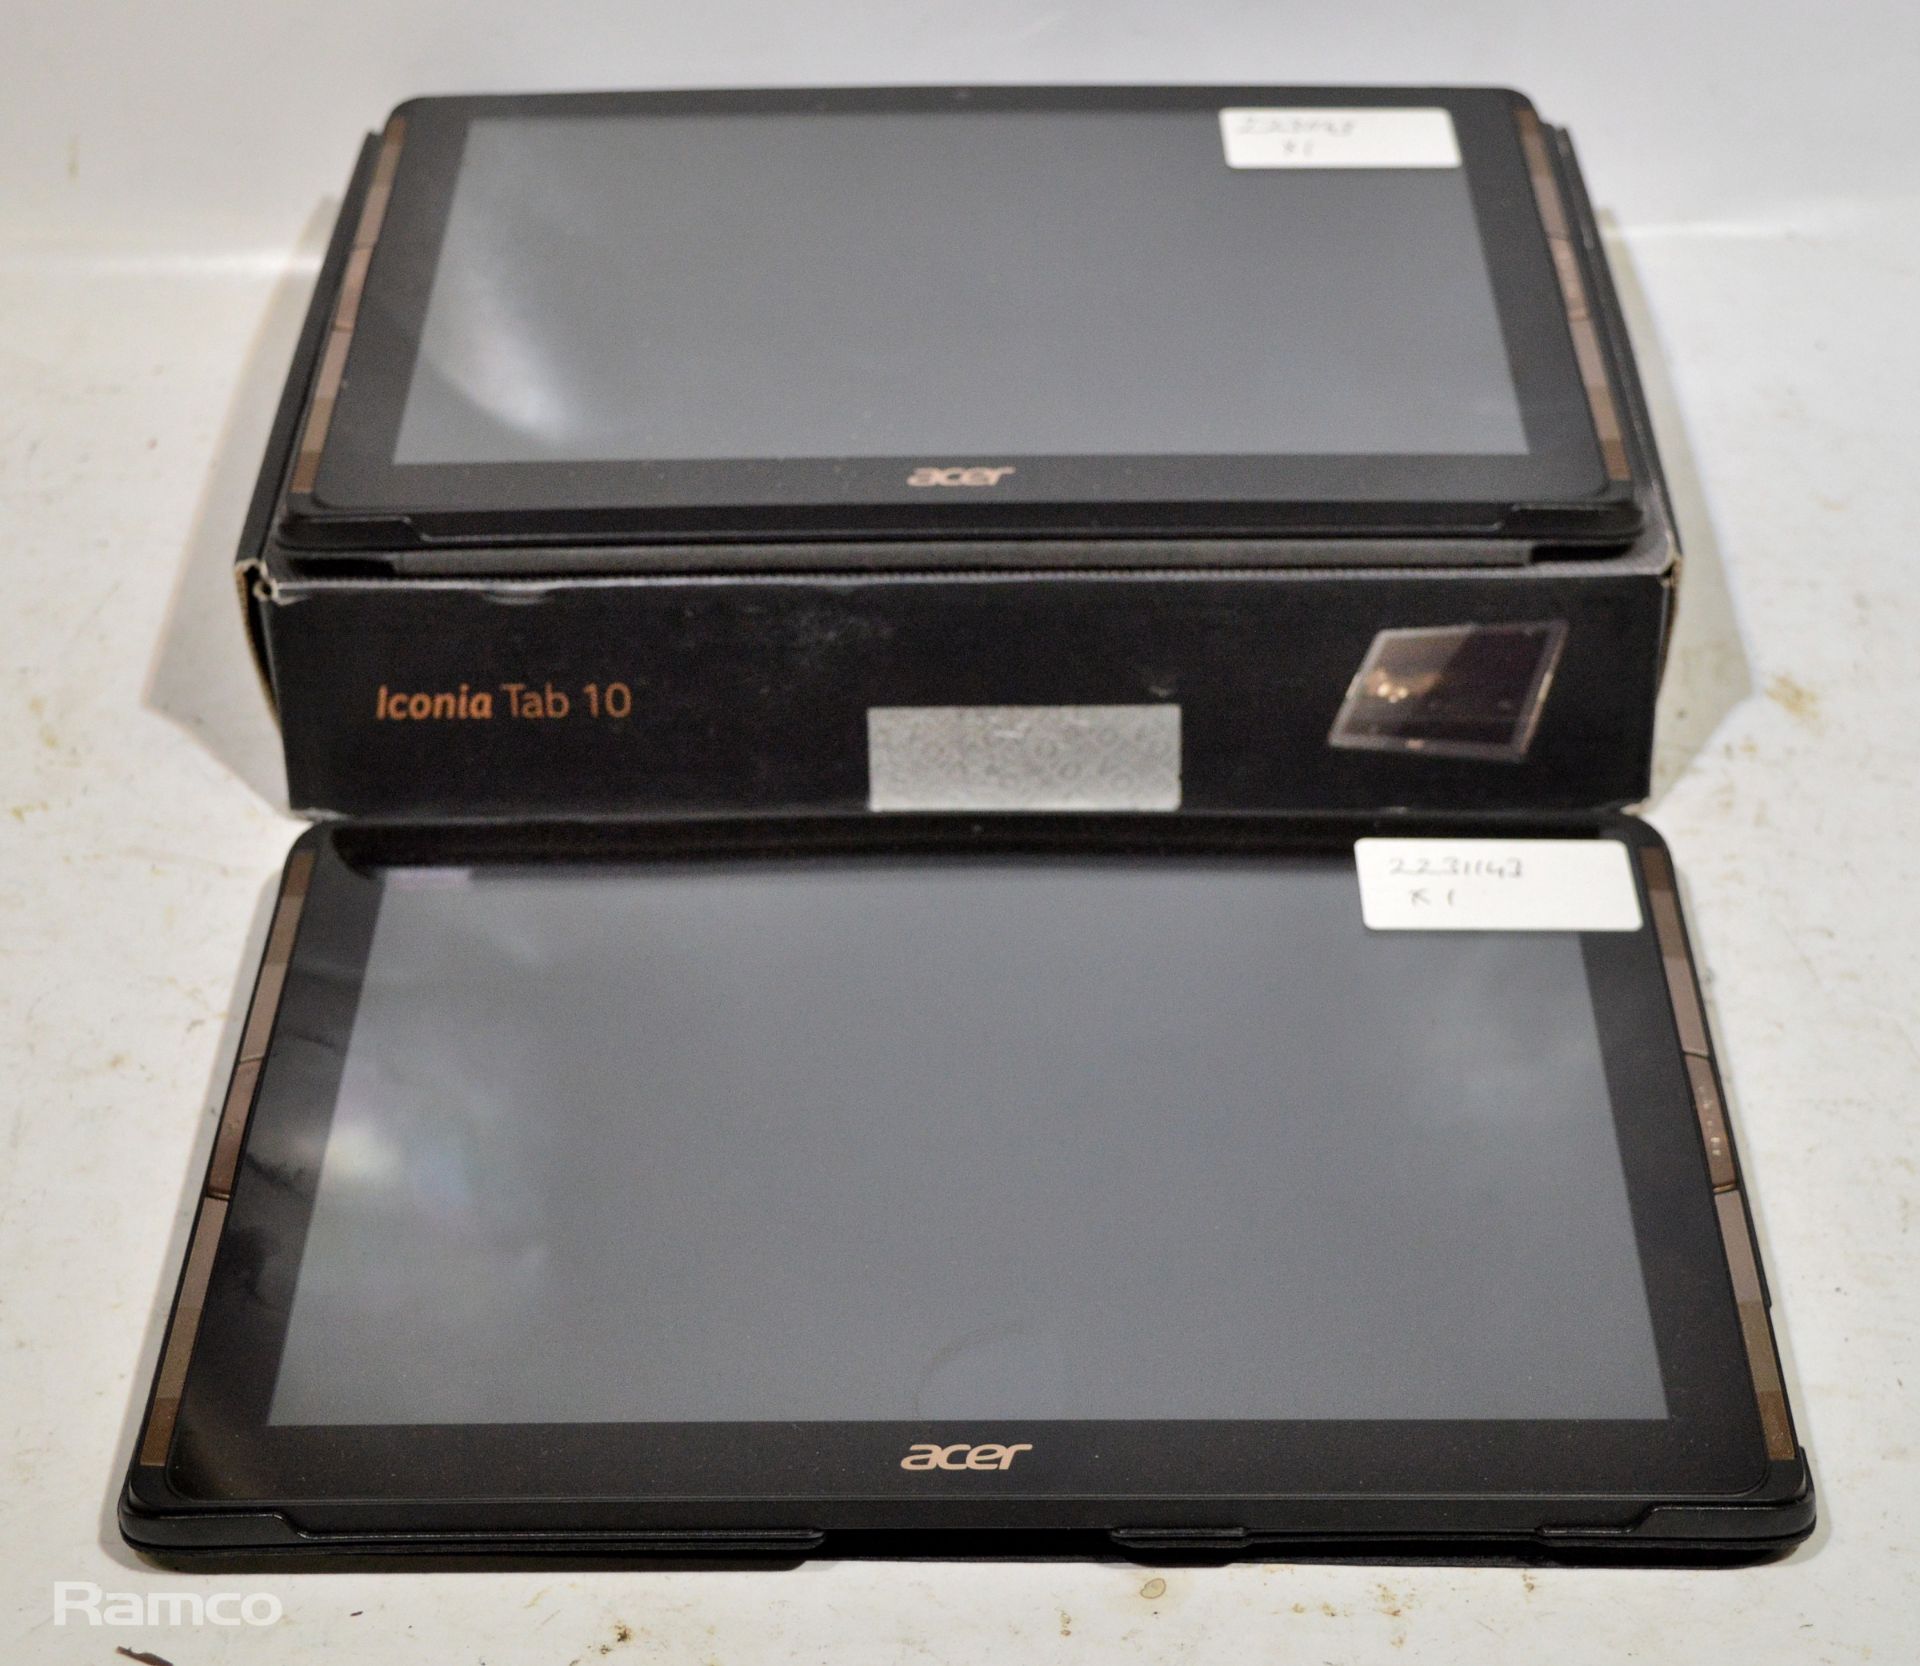 2x Acer A6002 Iconia Tab 10 tablets